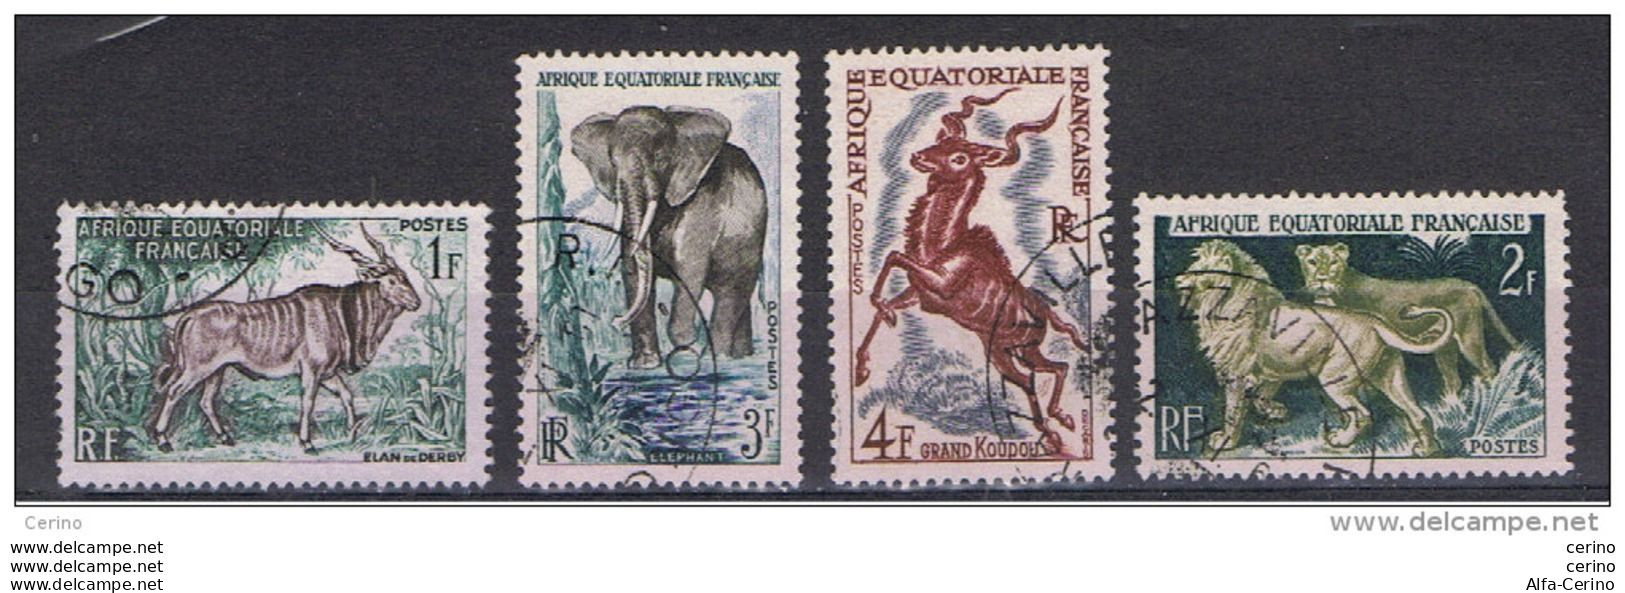 AFR..EQUATORIALE  FRANCESE:  1957  FAUNA  AFRICANA  -  S. CPL. 4  VAL. US. -  YV/TELL. 238/41 - Gebraucht